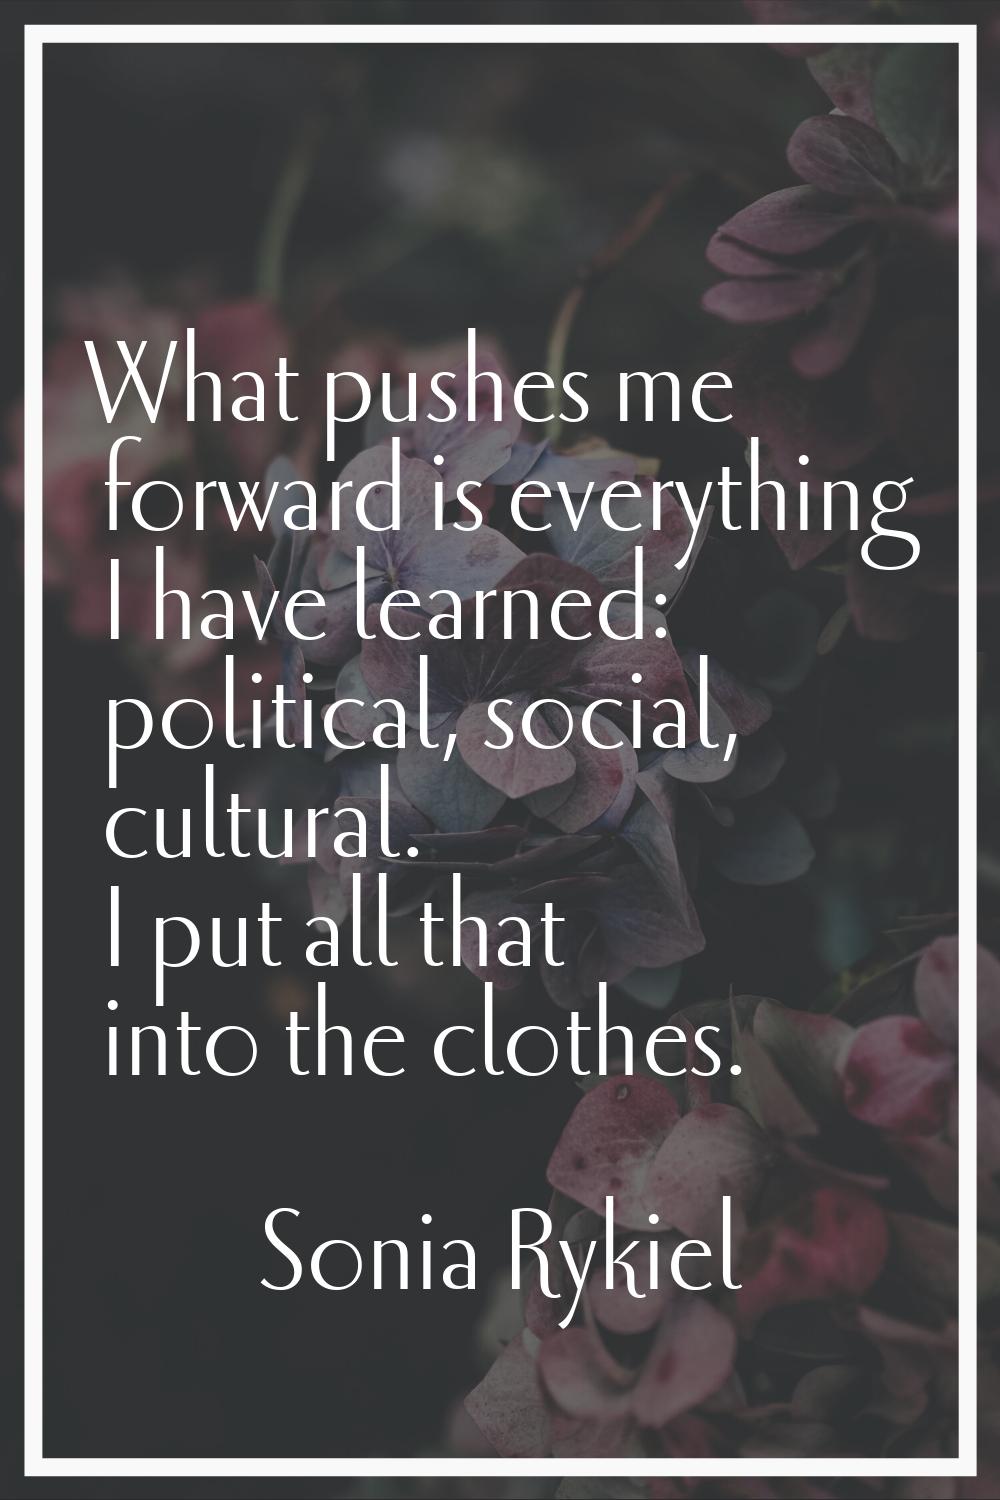 What pushes me forward is everything I have learned: political, social, cultural. I put all that in